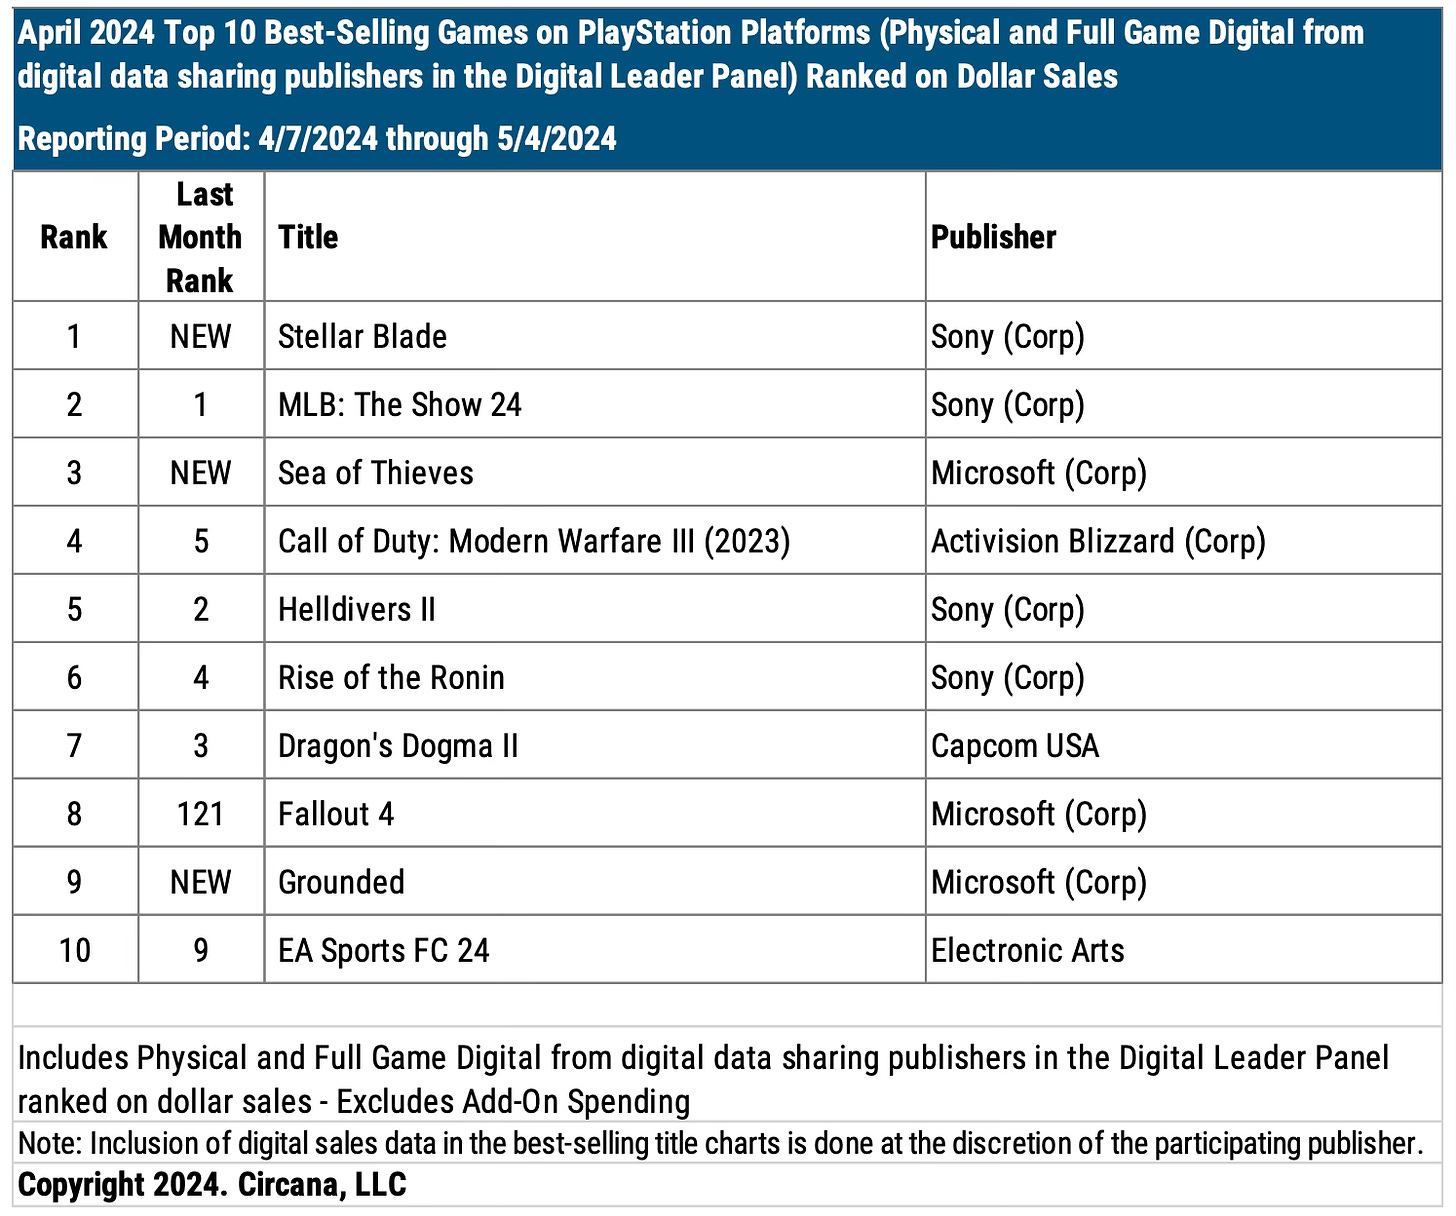 Chart showing the top 10 best-selling games on PlayStation platforms in April 2024